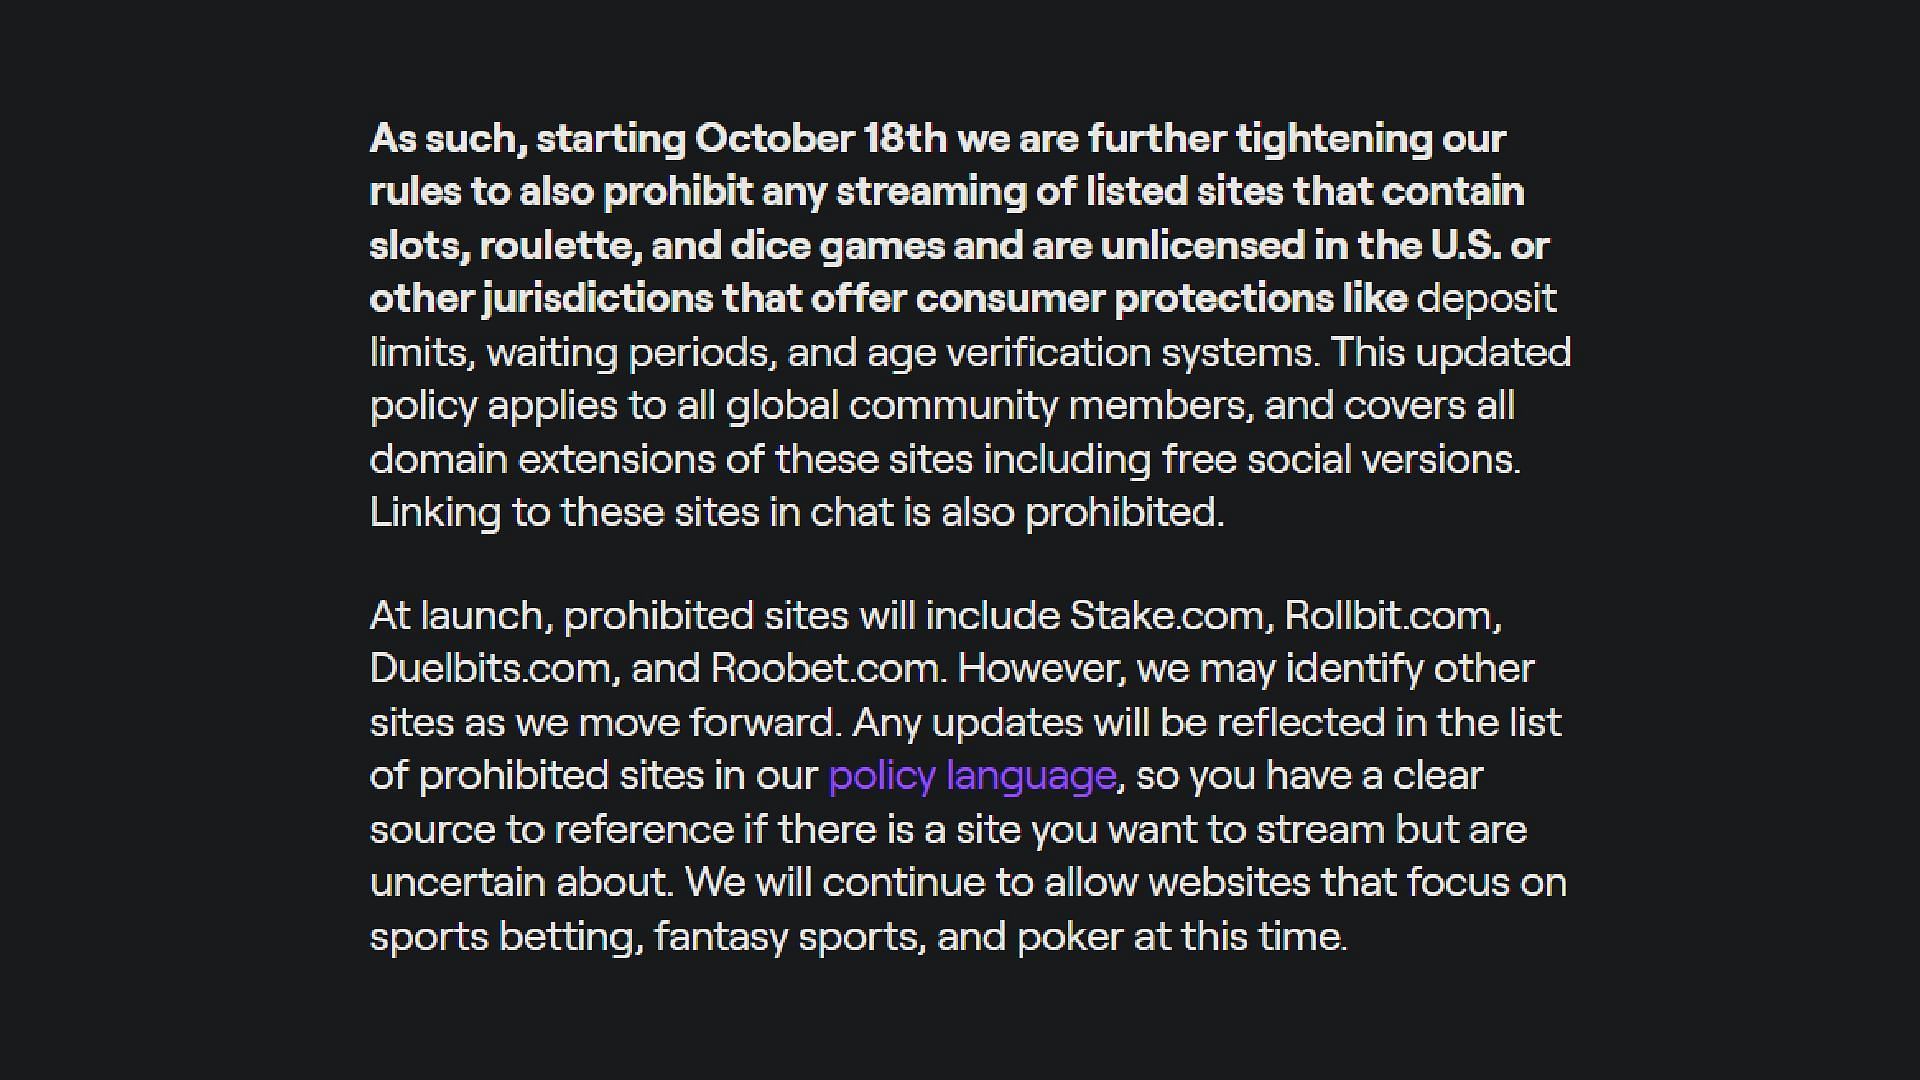 Policy update on gambling. (Image via safety.twitch.tv)